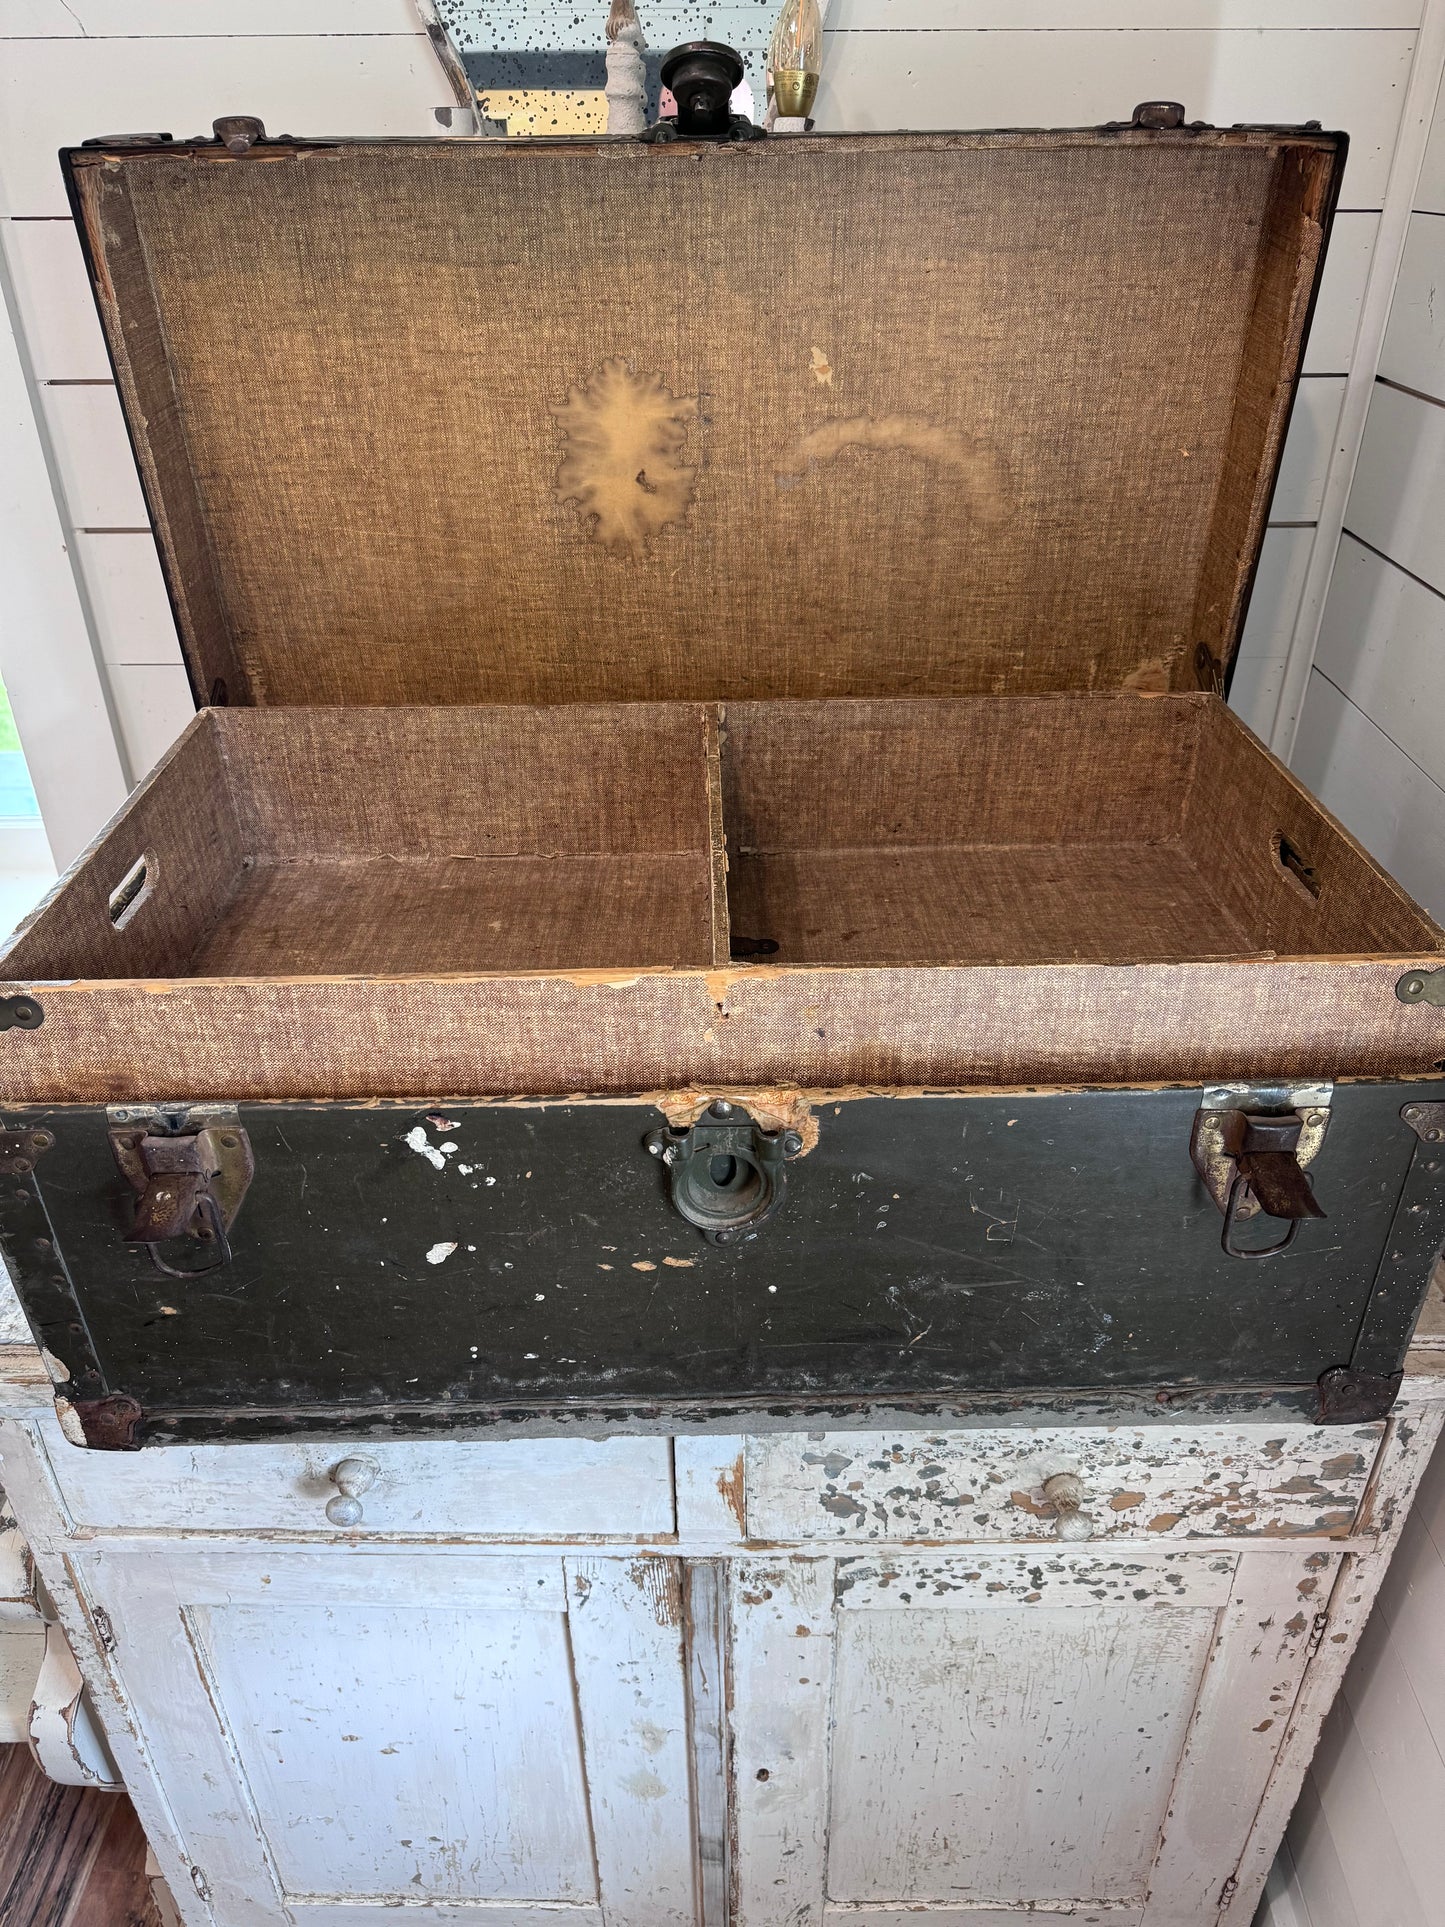 Vintage Military Style Trunk